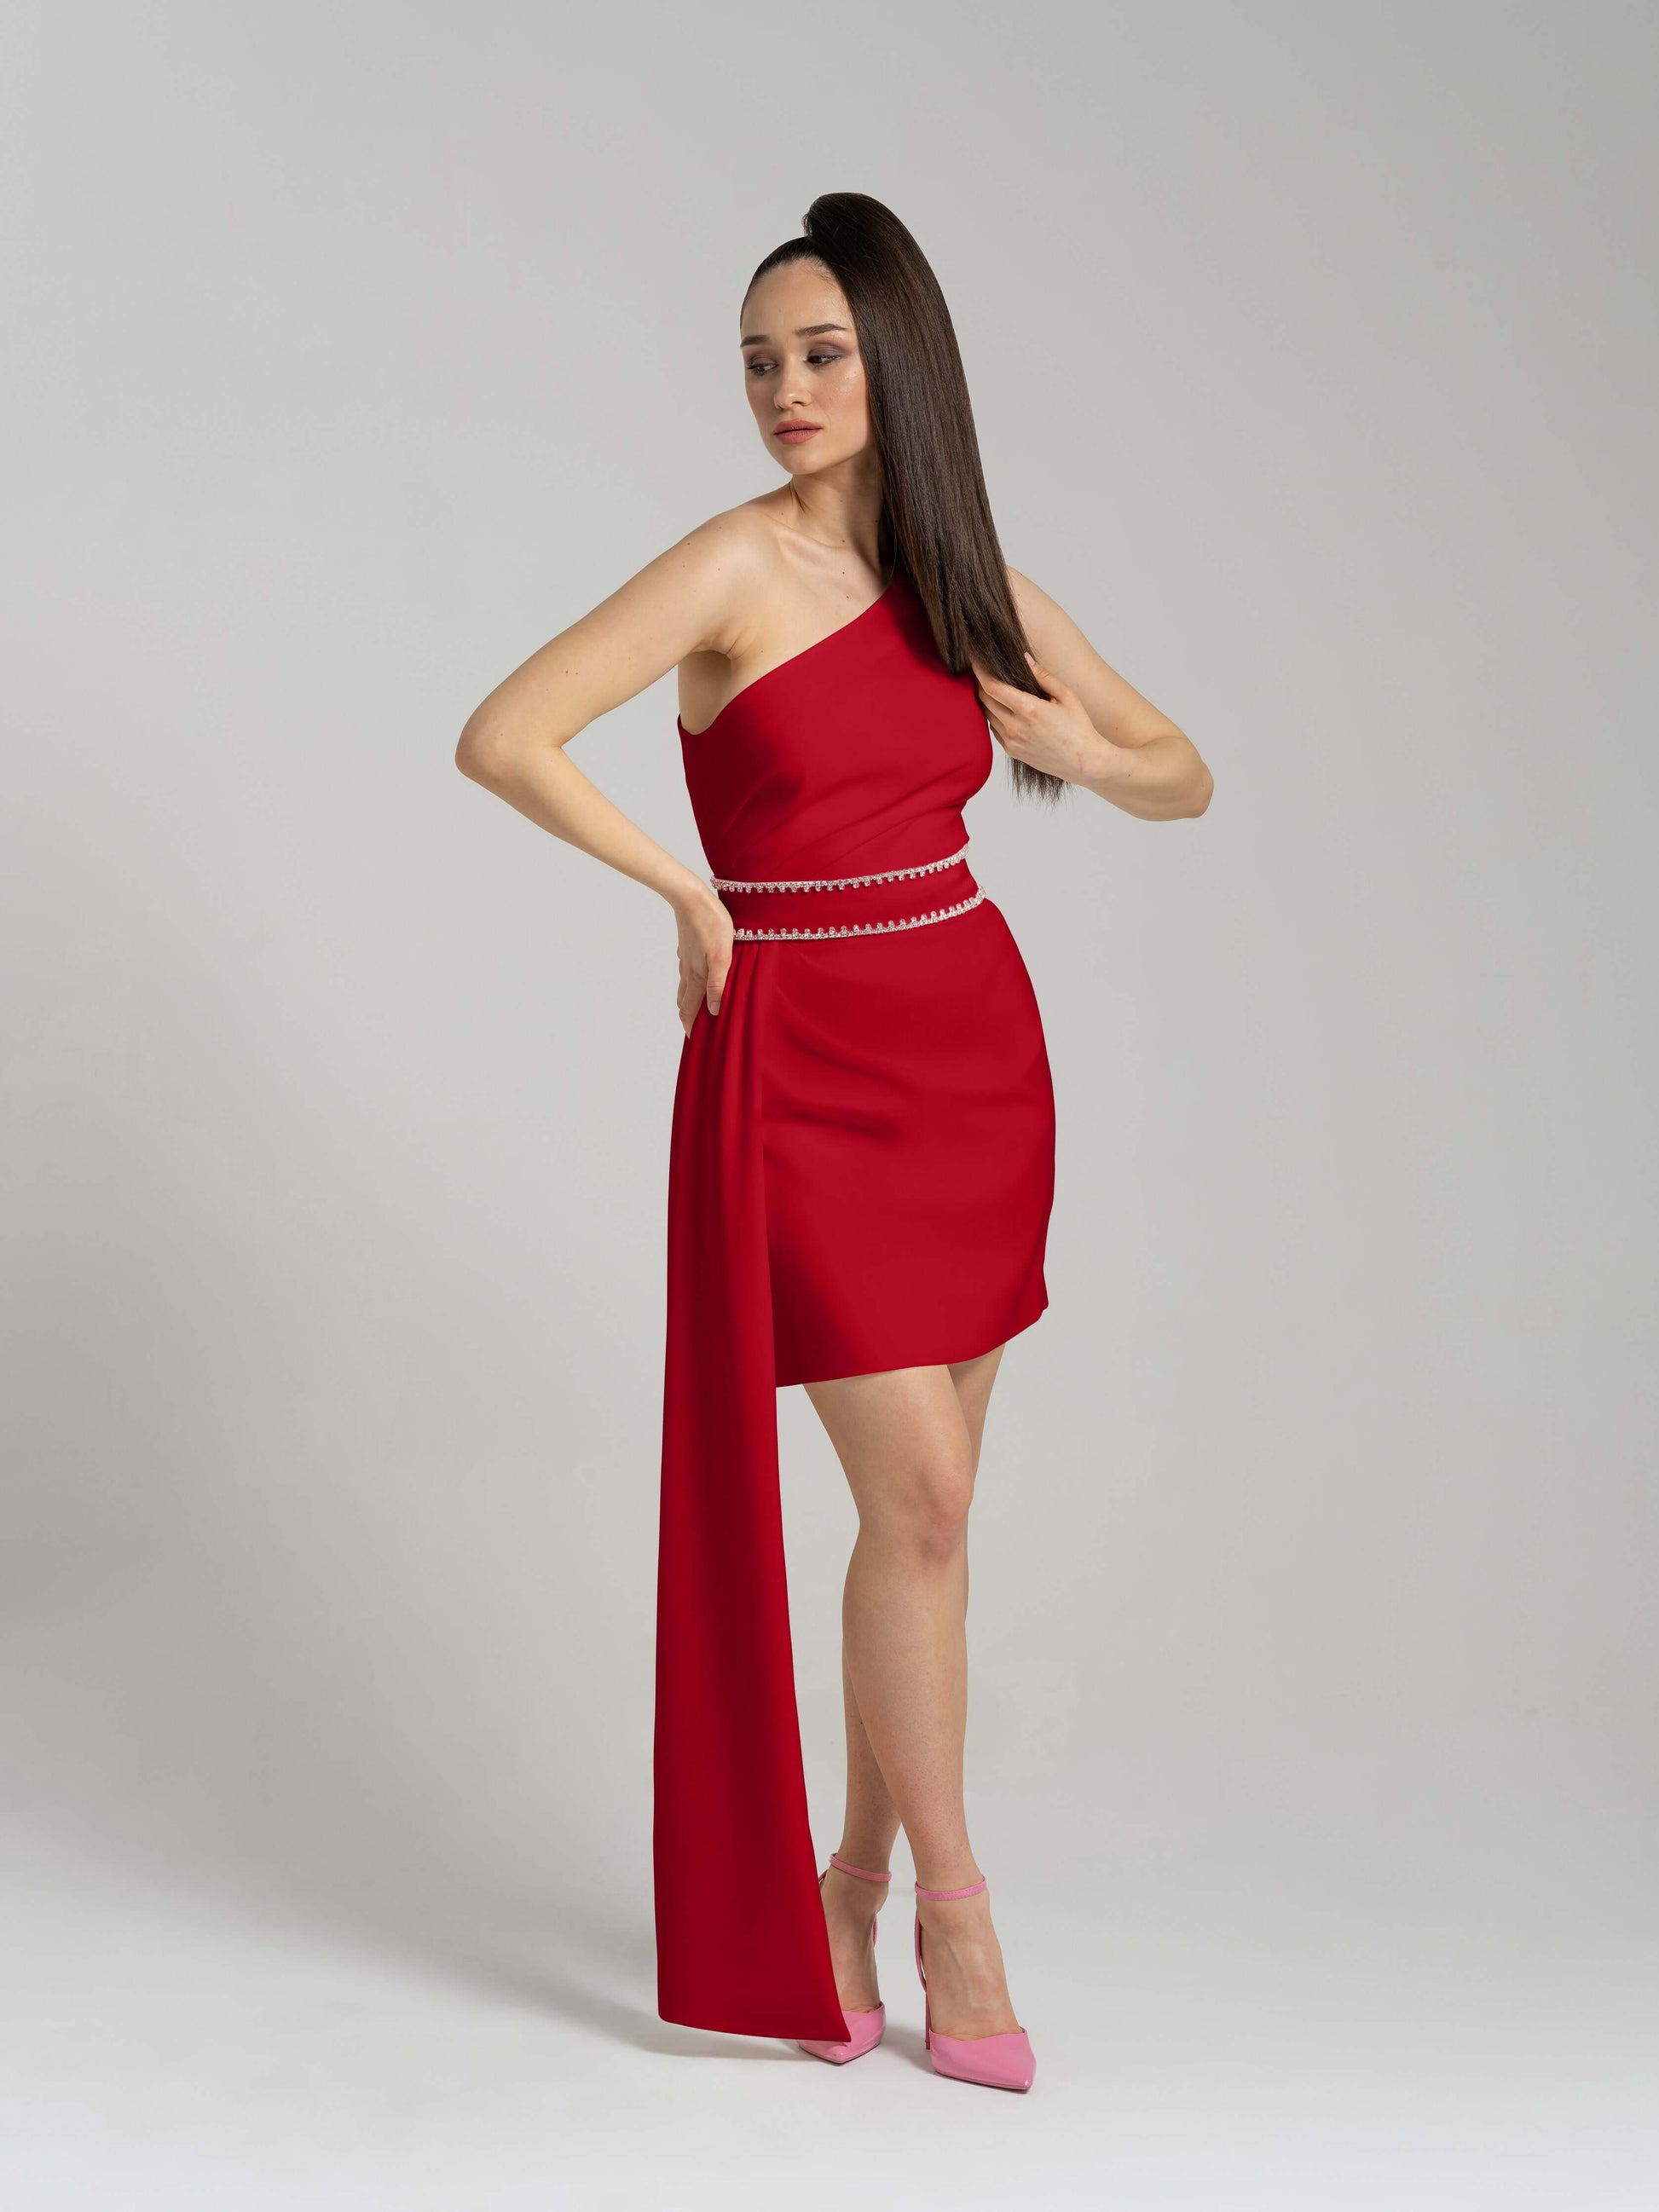 Iconic Glamour Crystal-Adorned Dress - Red by Tia Dorraine Women's Luxury Fashion Designer Clothing Brand